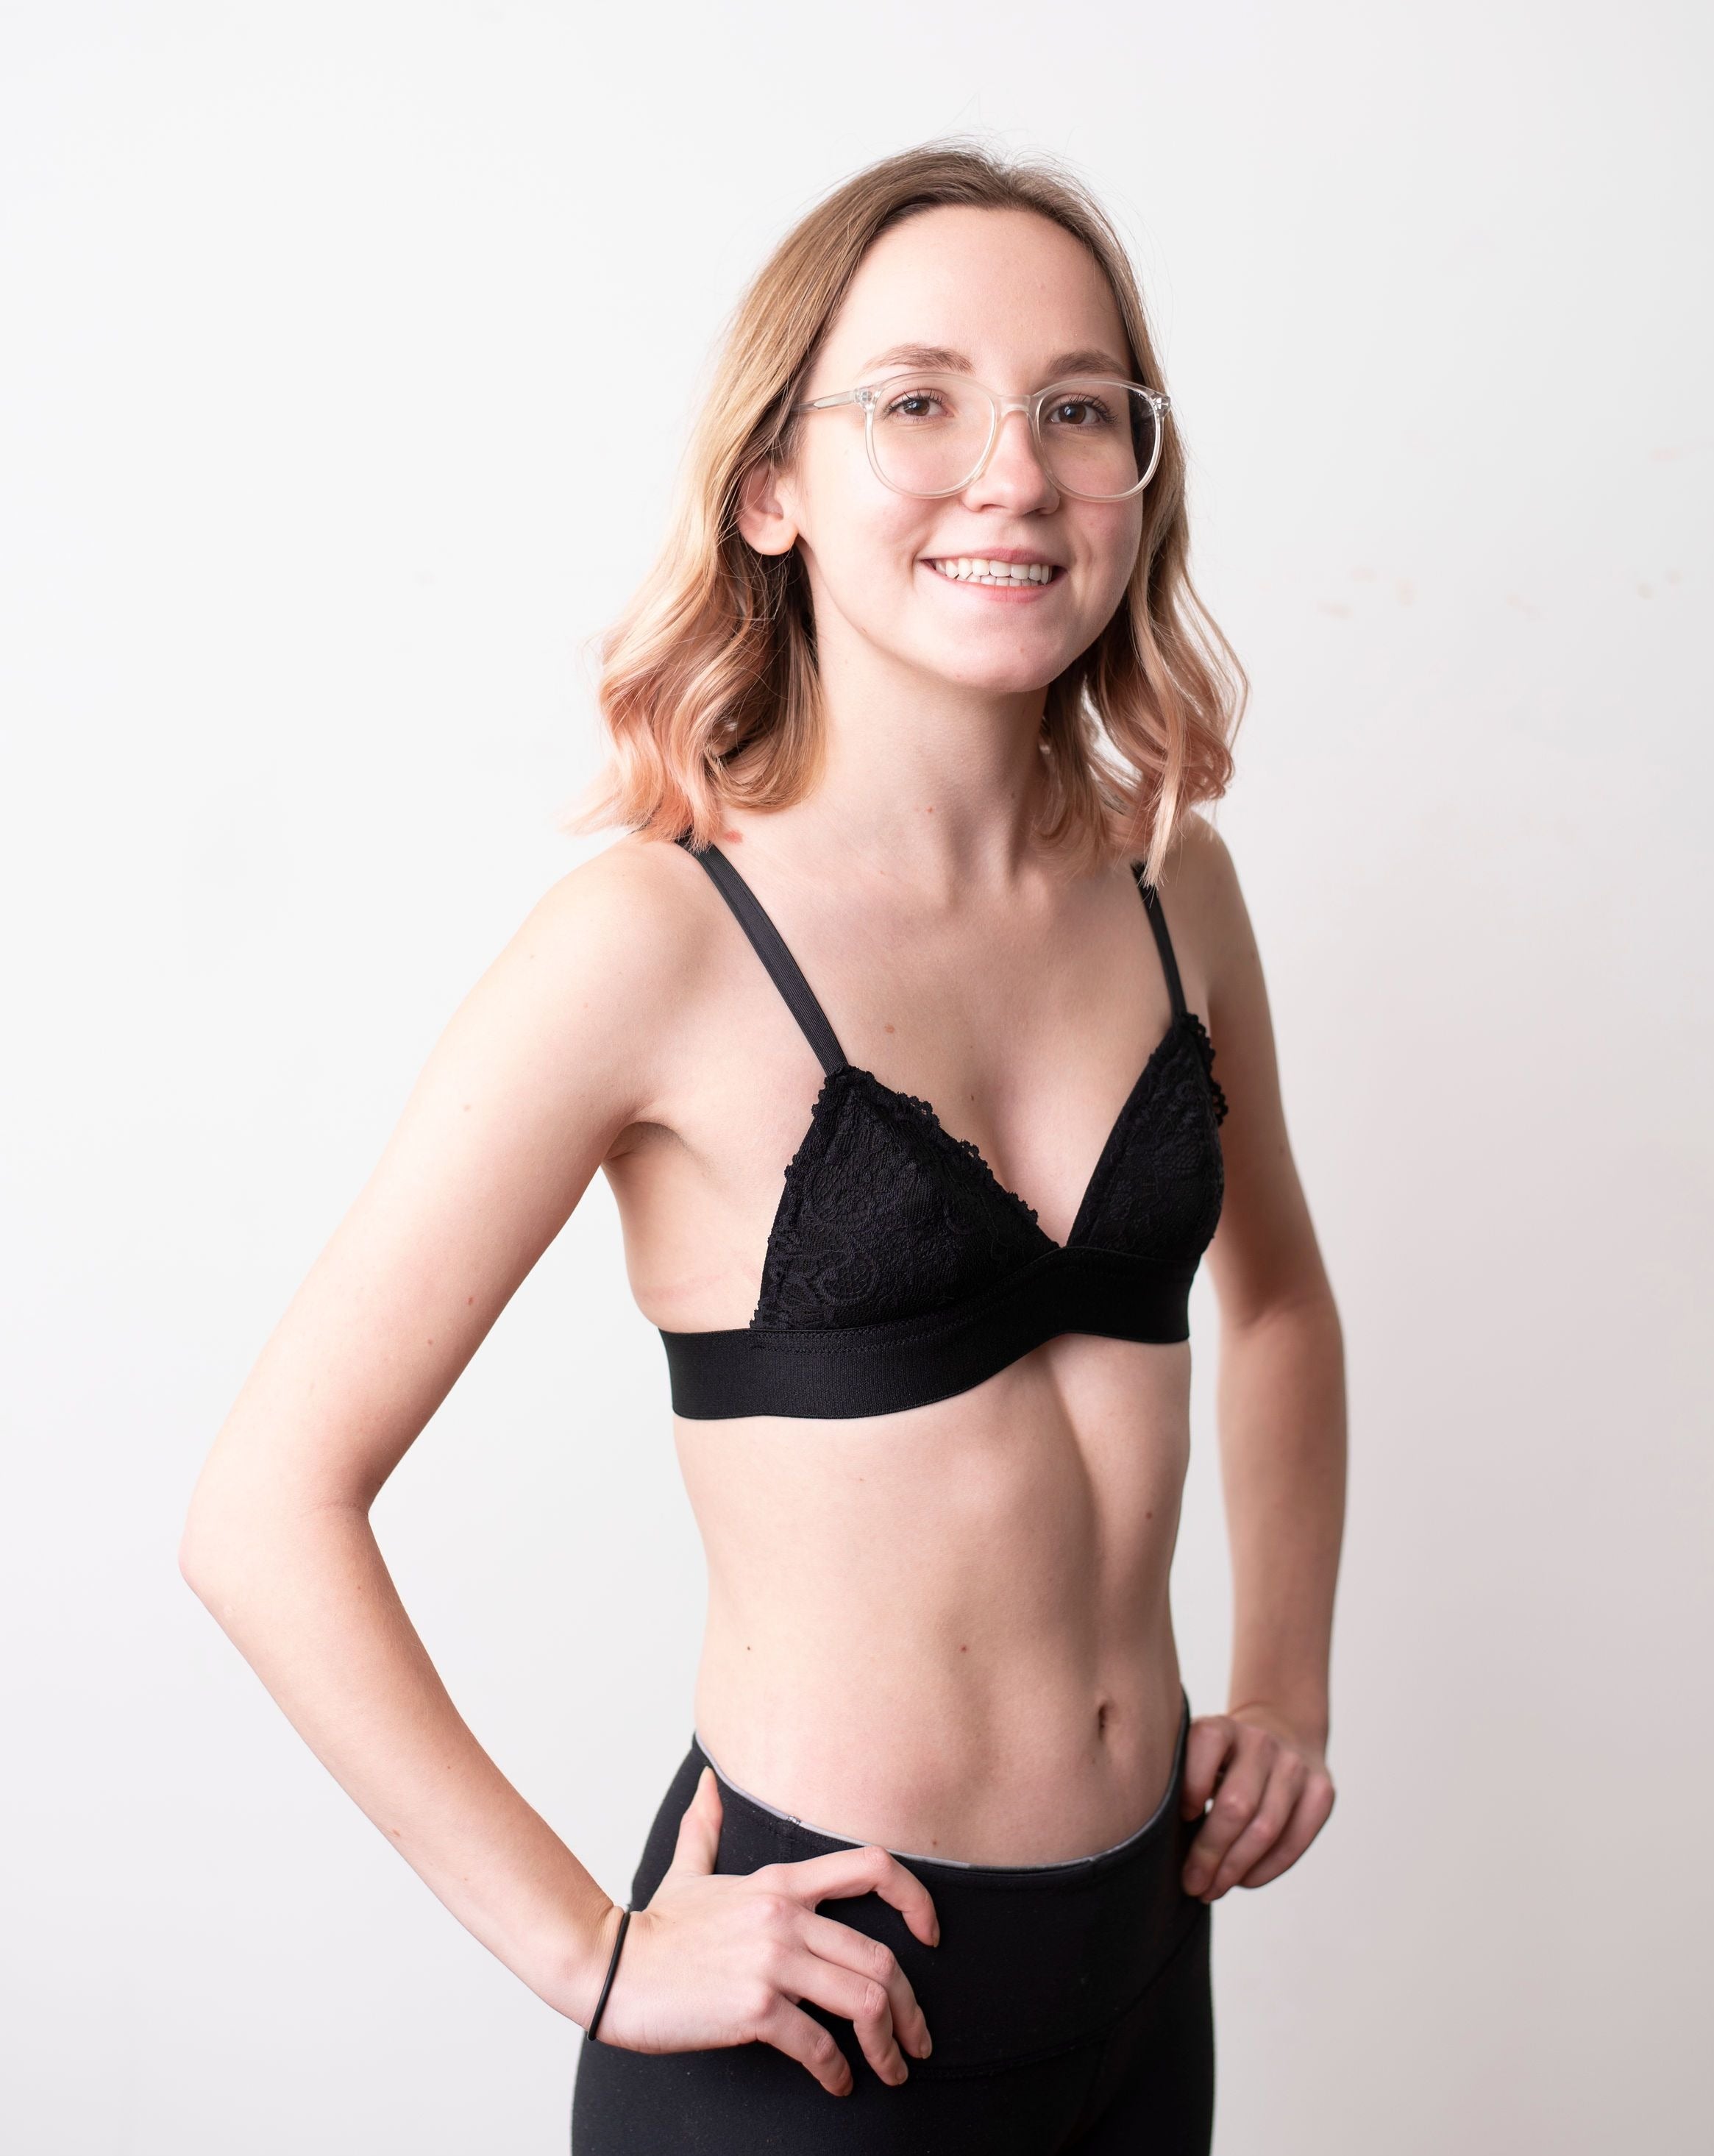 Haley from Rubies Bras, a female with medium blond hair wearing a black scalloped lace wirefree bra from our petites collection. Full side body shot on white back drop.